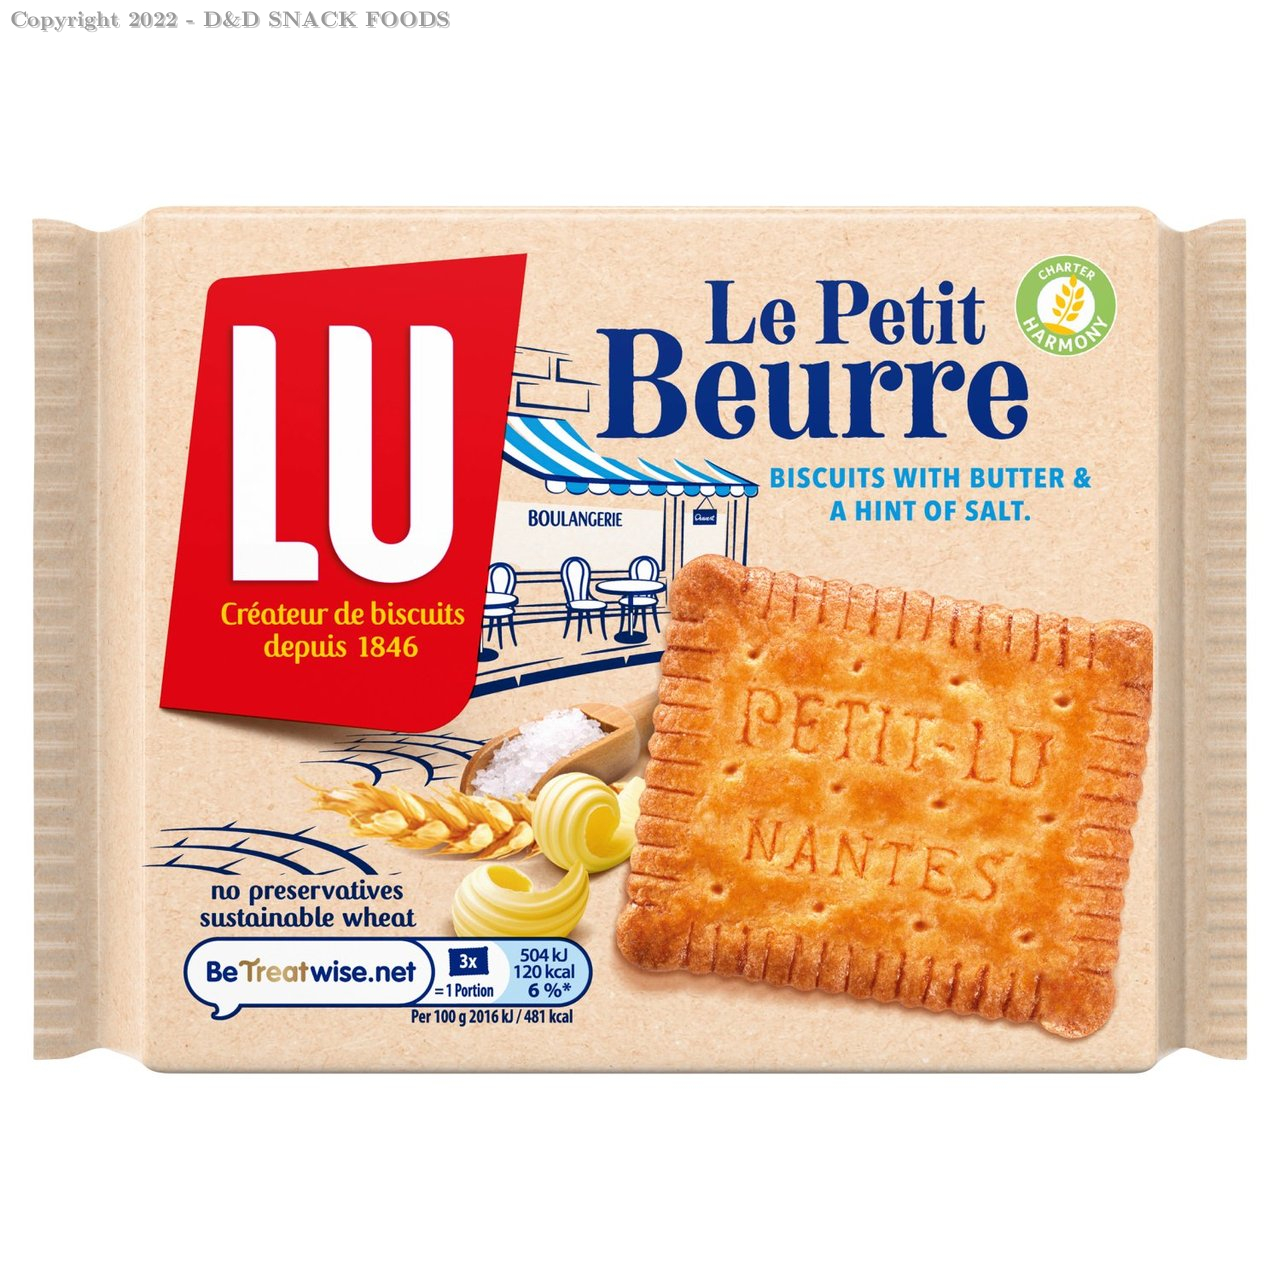 LU BUTTER SALTED BISC